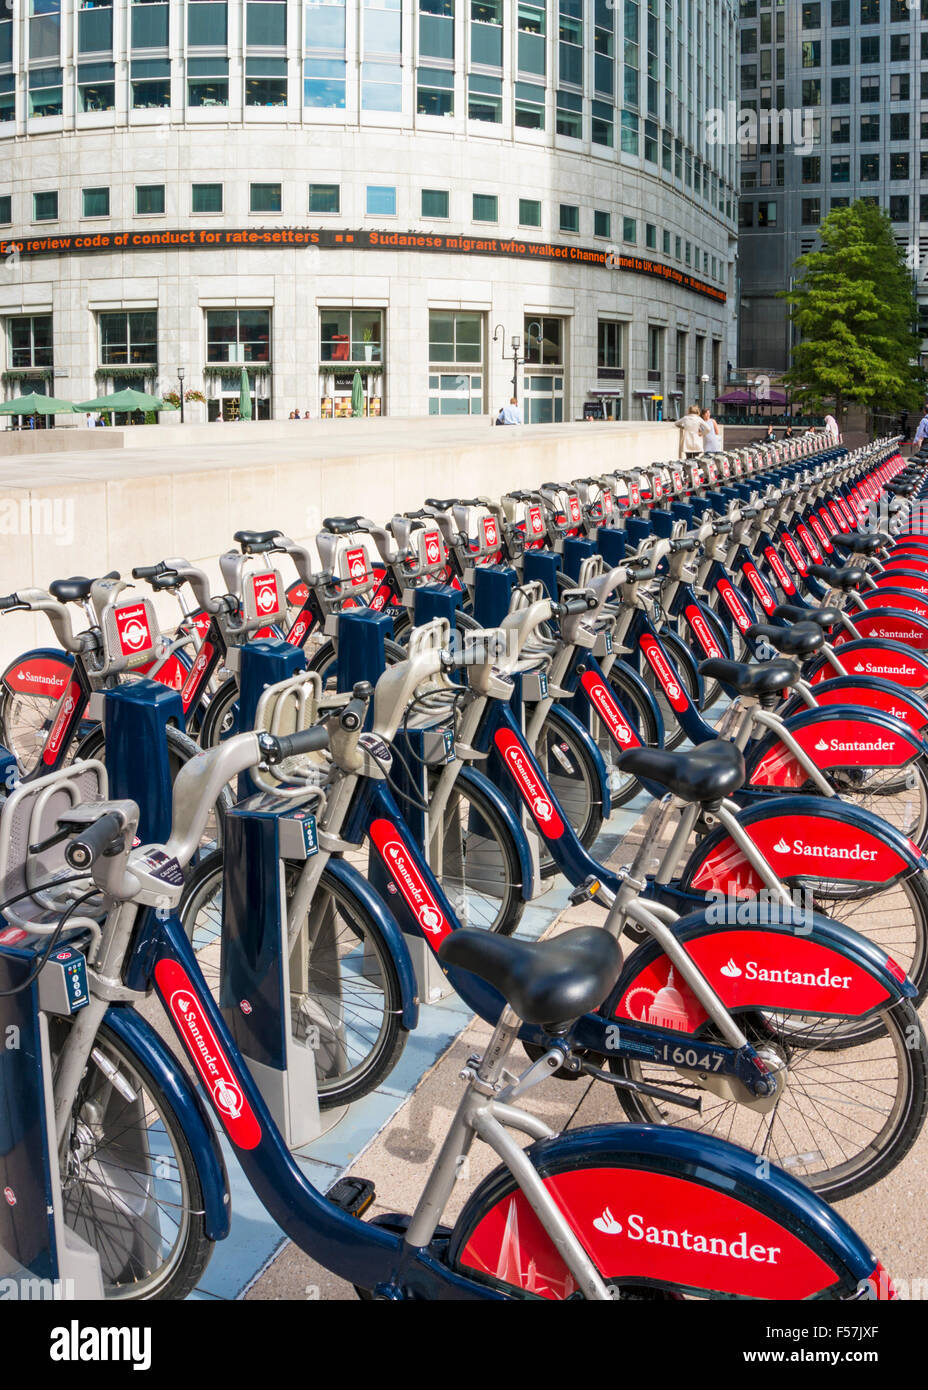 Santander red Boris Bikes for hire in a docking station Canary Wharf London England UK GB EU Europe Stock Photo